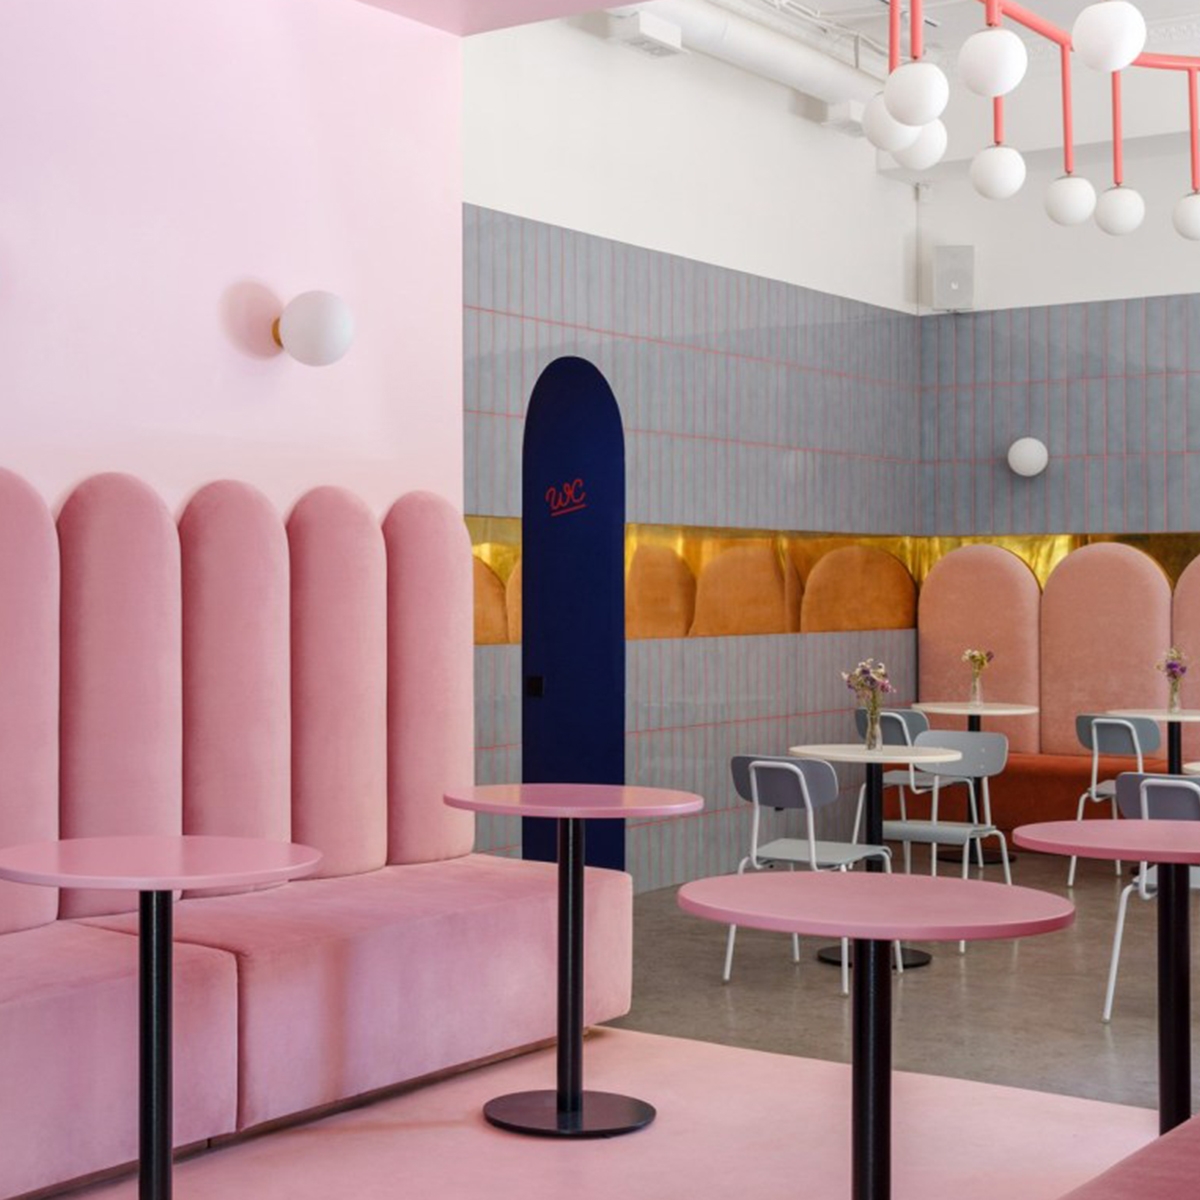 The confident colour platte of bubblegum pink, bold blue and gold interior of the new BreadWay bakery in central Odessa, Ukraine. #sophierobinson #cafe #bakery #cafeinterior